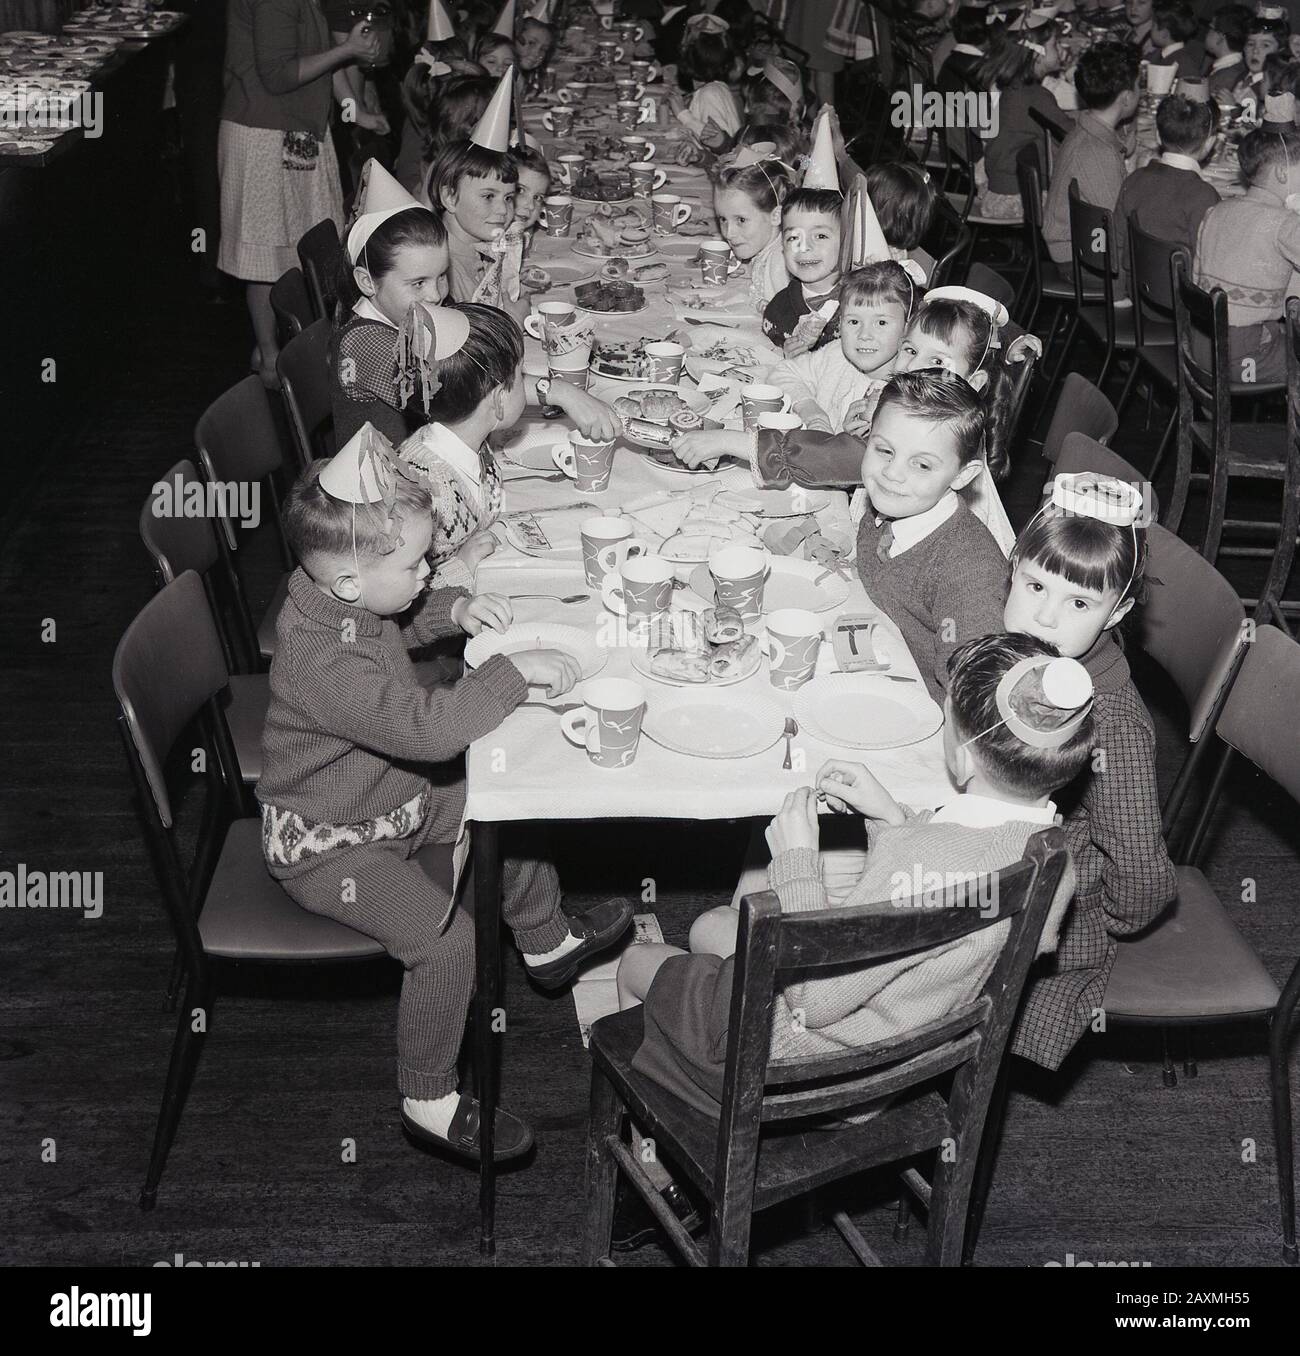 1960s, historical, in a dinning room, young school children in party hats having fun together at a christmas meal, England, UK Stock Photo